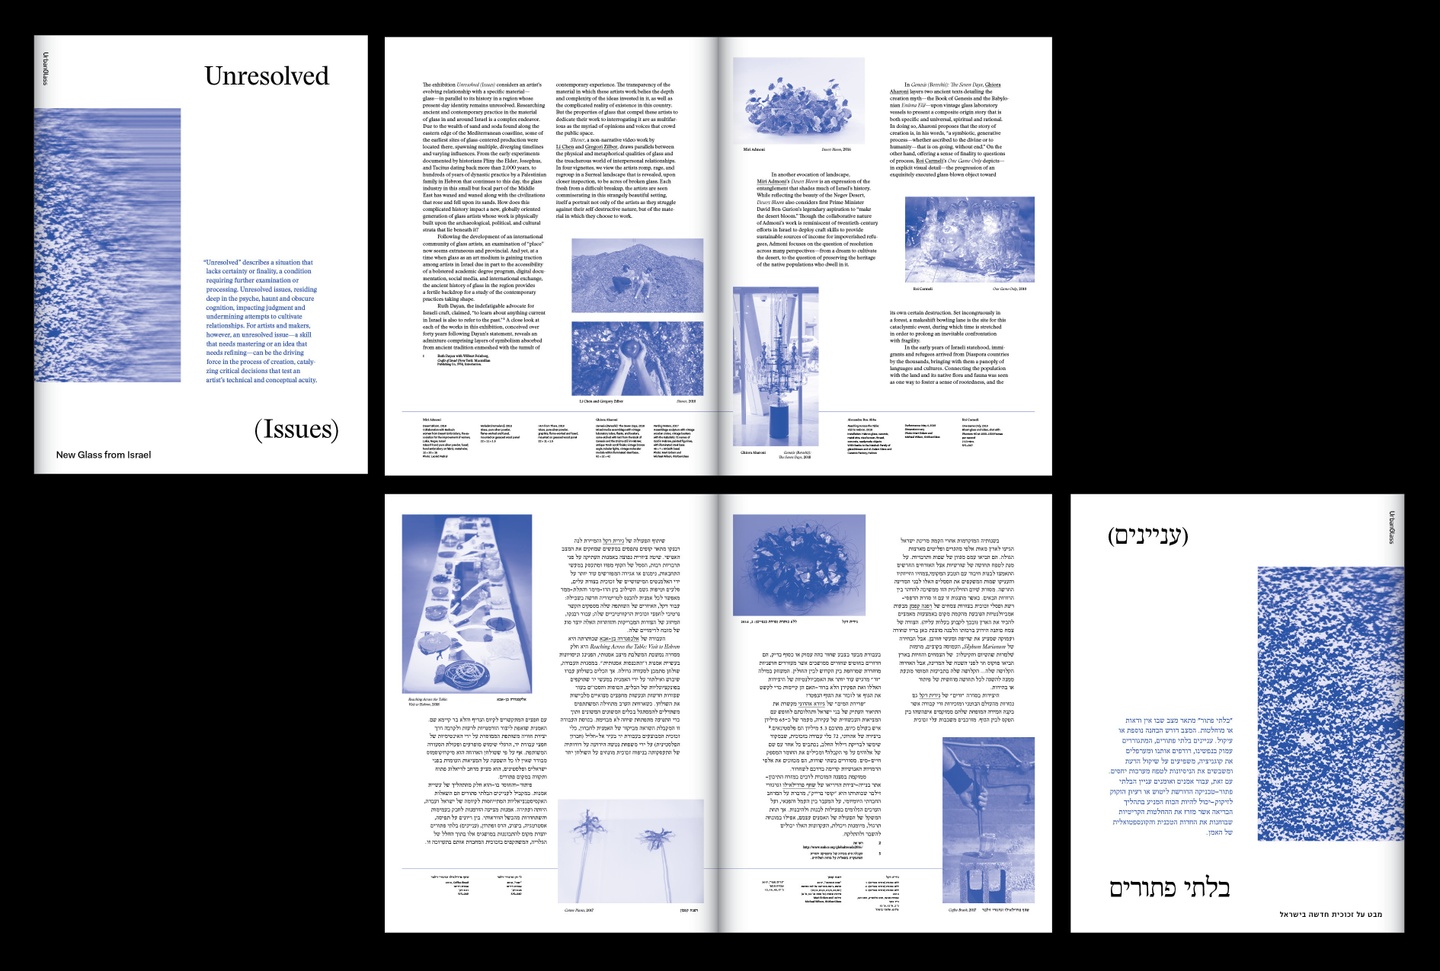 Views of the covers of a book with two interior spreads: the images are printed in ultramarine/a dark blue, with both Hebrew and English text set in black. The front cover, in English, reads "Unresolved (Issues)".